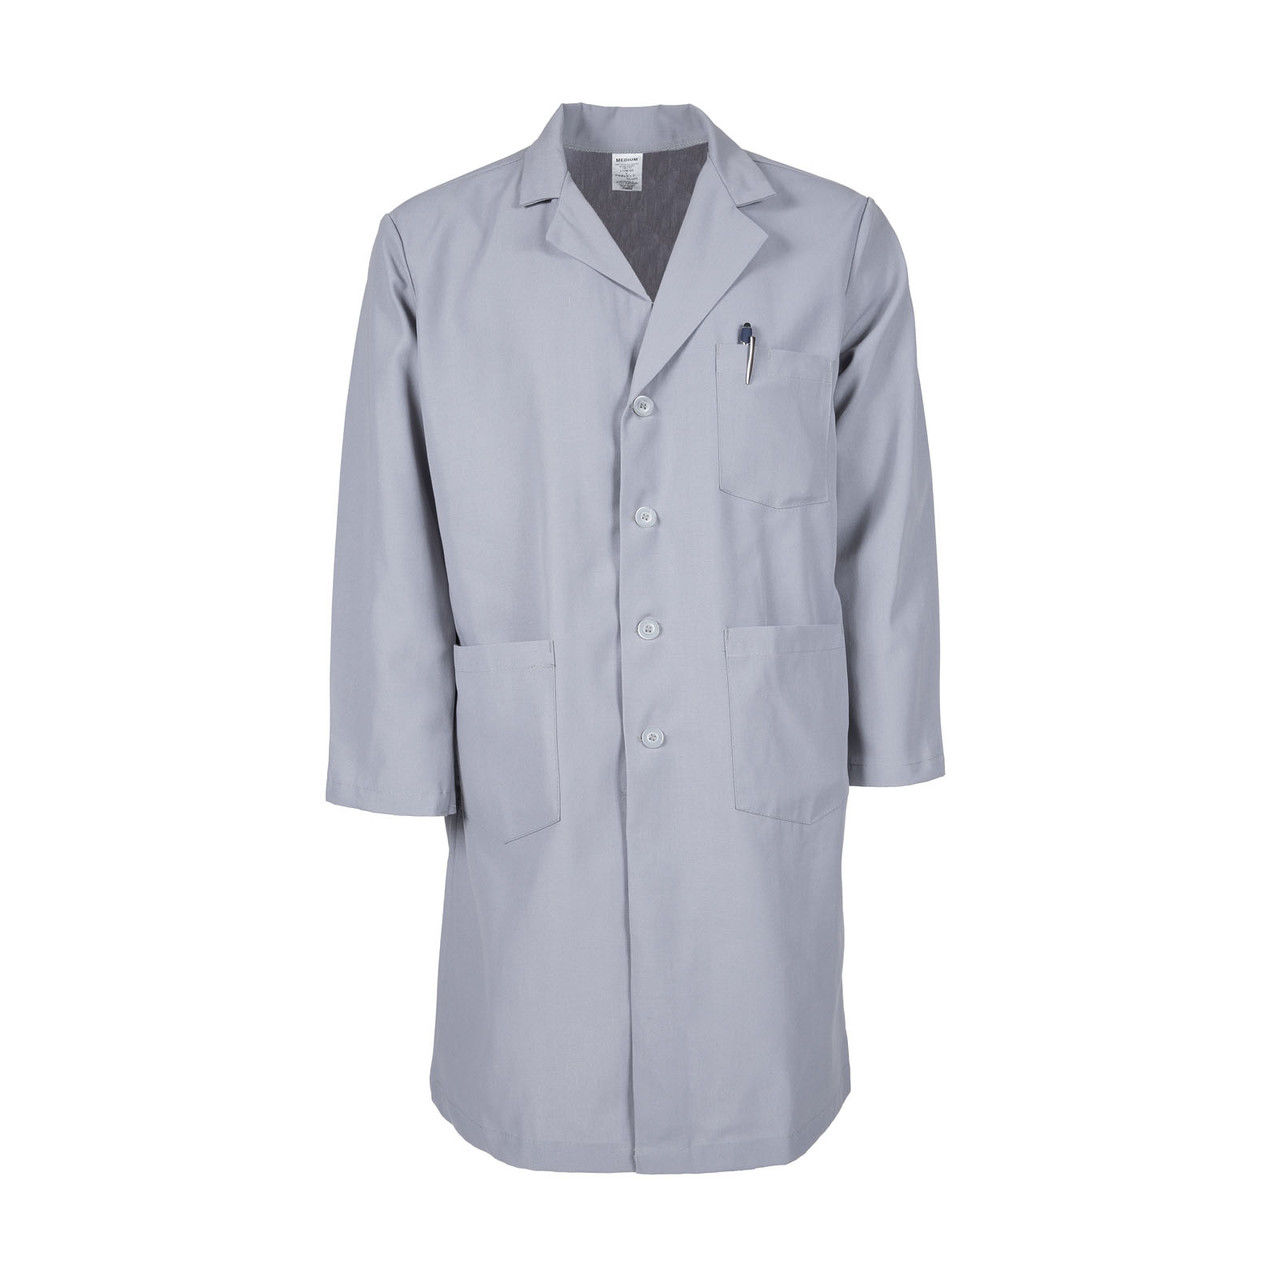 What is the best type of lab coat?